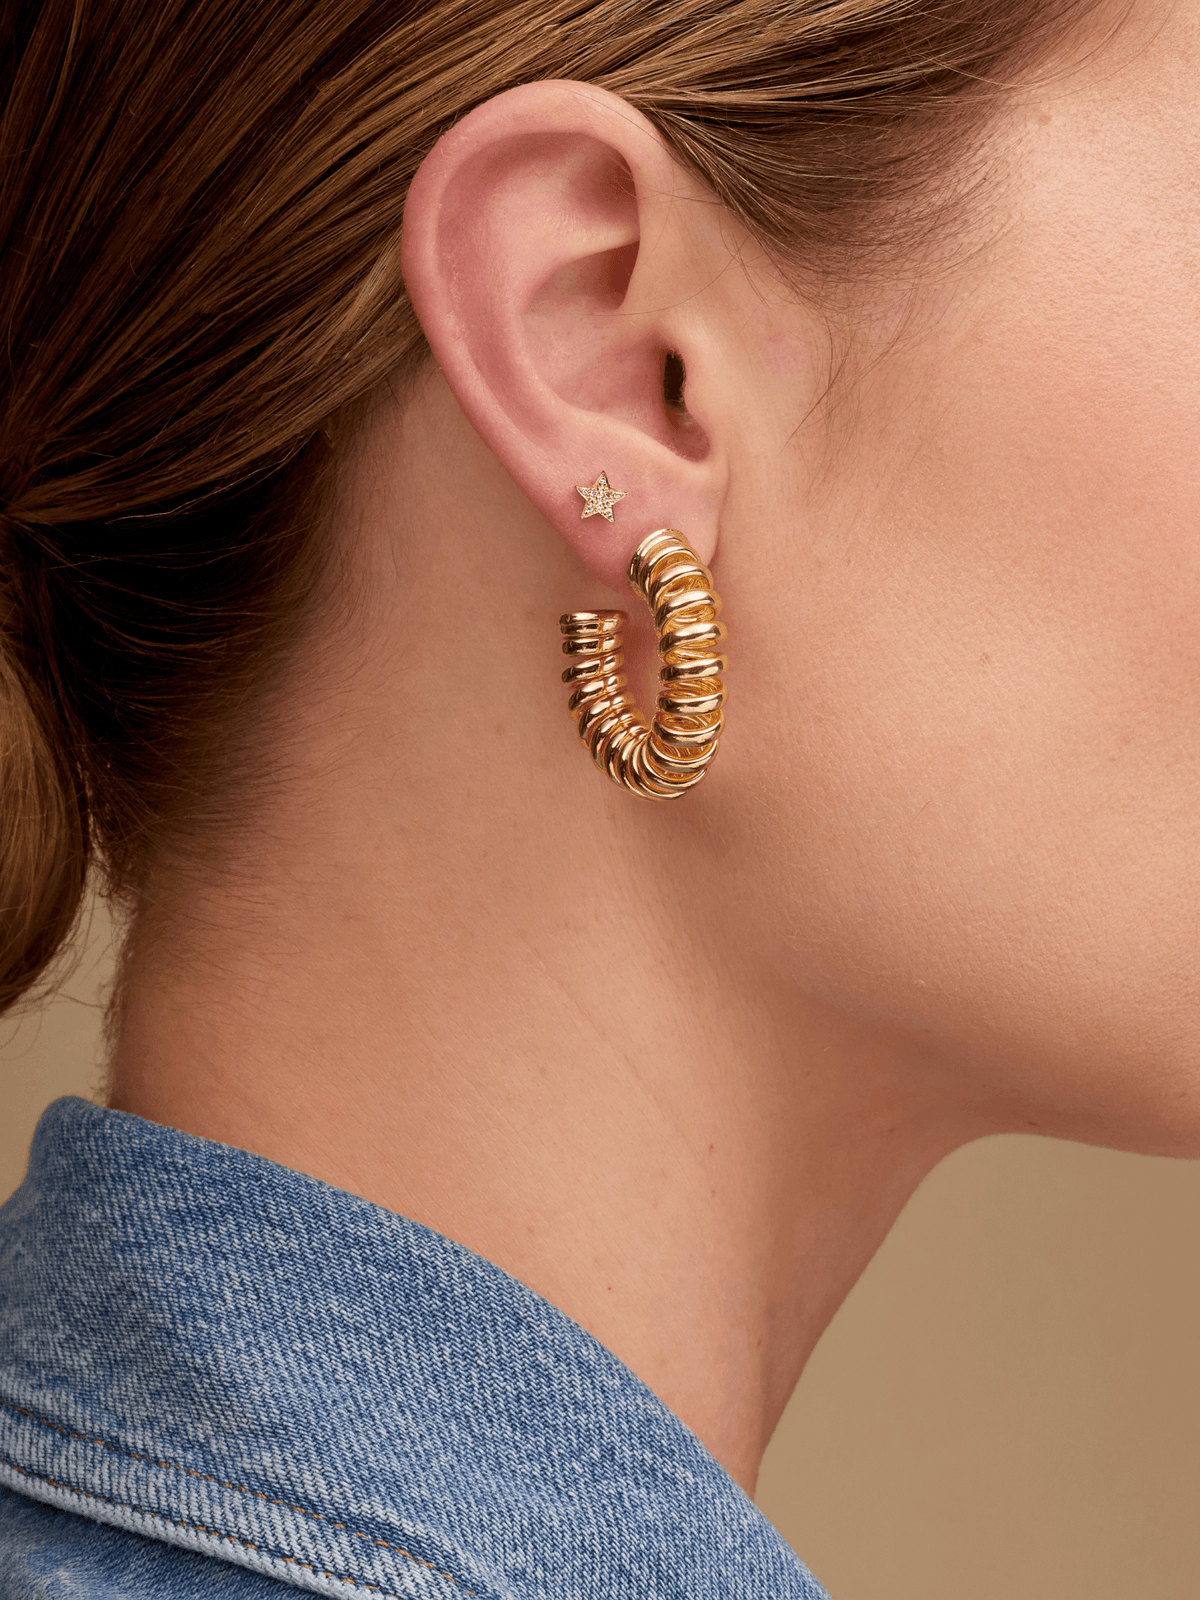 Gold star earring paired with large gold coil hoop